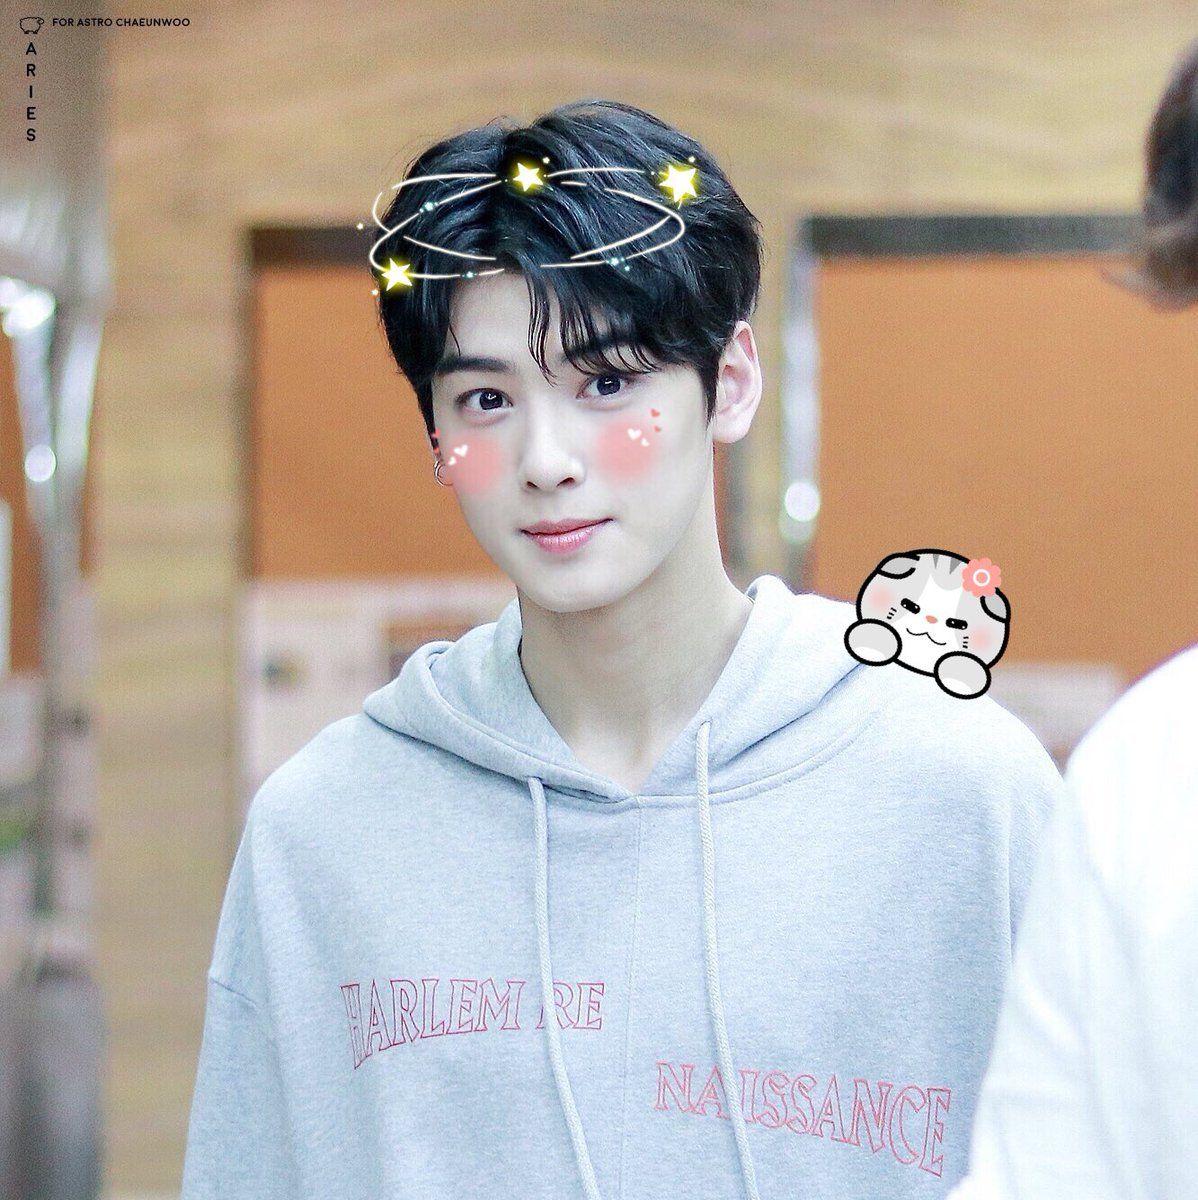 Just 51 Photo of ASTRO Cha Eunwoo That You Need In Your Day